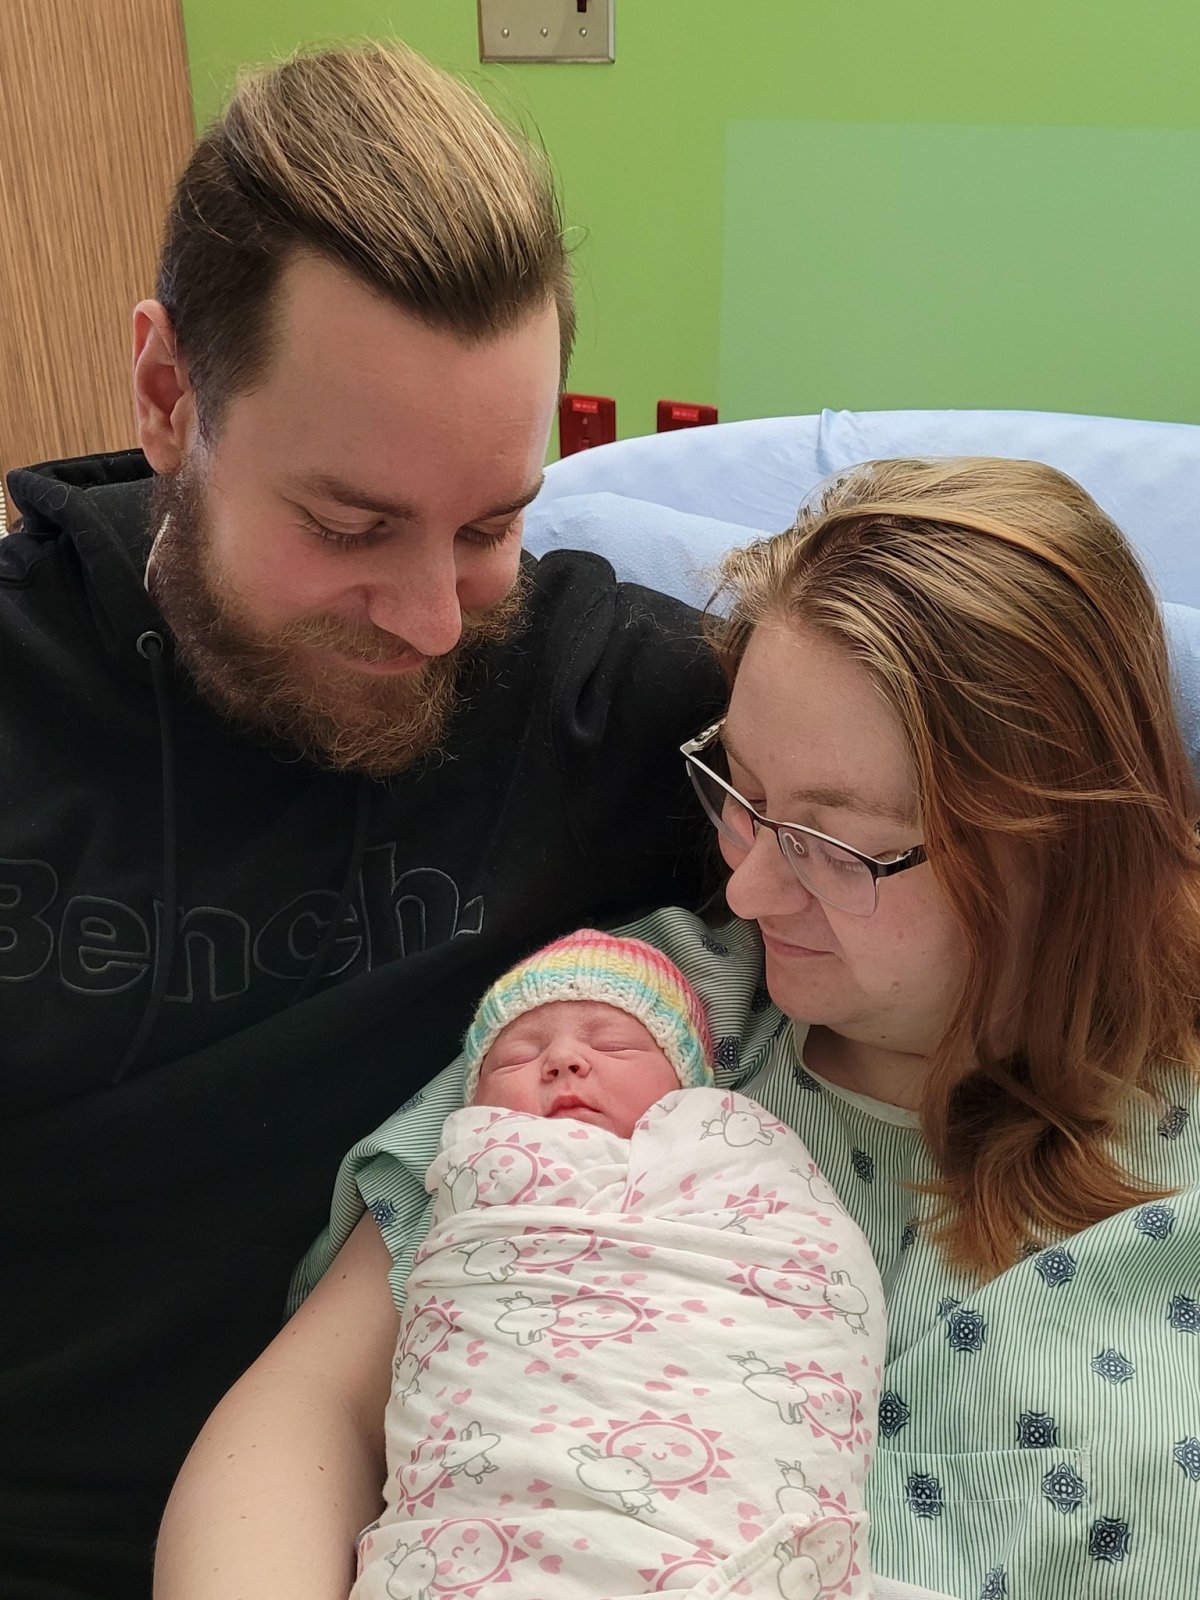 At the Lakeshore General Hospital in Montreal's West Island, baby girl Hazel Letchuk made her arrival in the wee hours of Jan. 1. She is one of many babies born on New Year's Day in Quebec.